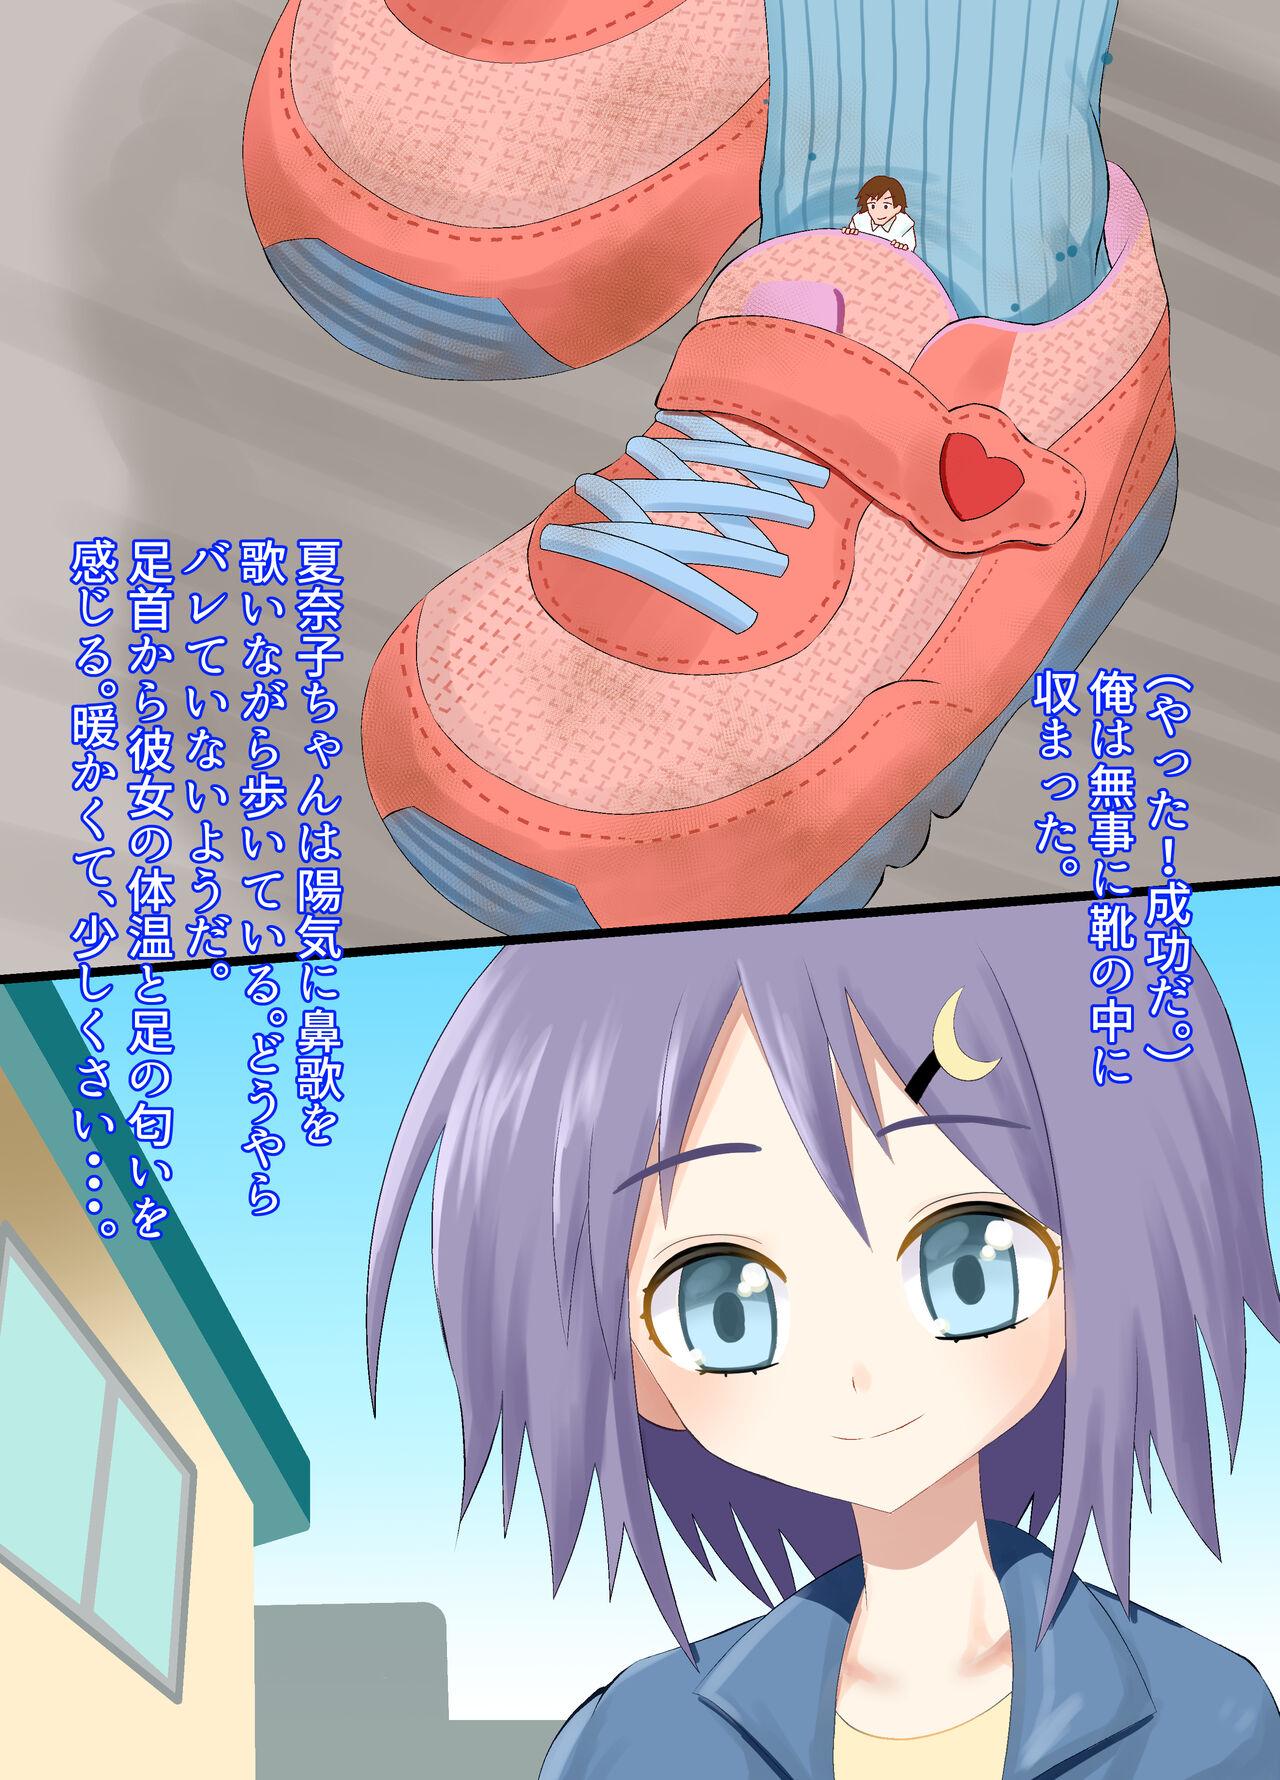 Cumming A CG collection of getting smaller and being stepped on by a girl - Original Dyke - Page 7